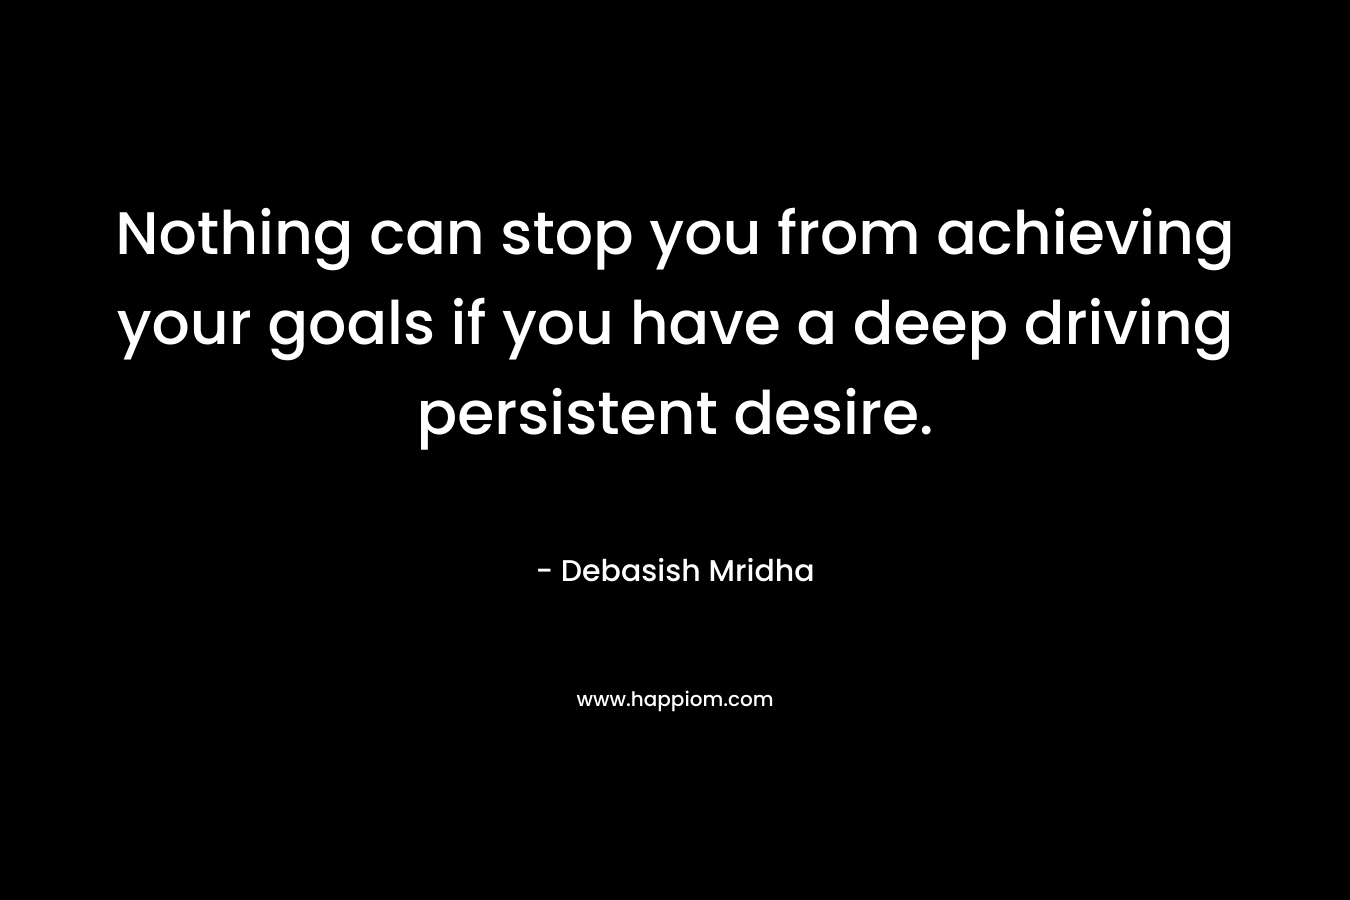 Nothing can stop you from achieving your goals if you have a deep driving persistent desire.